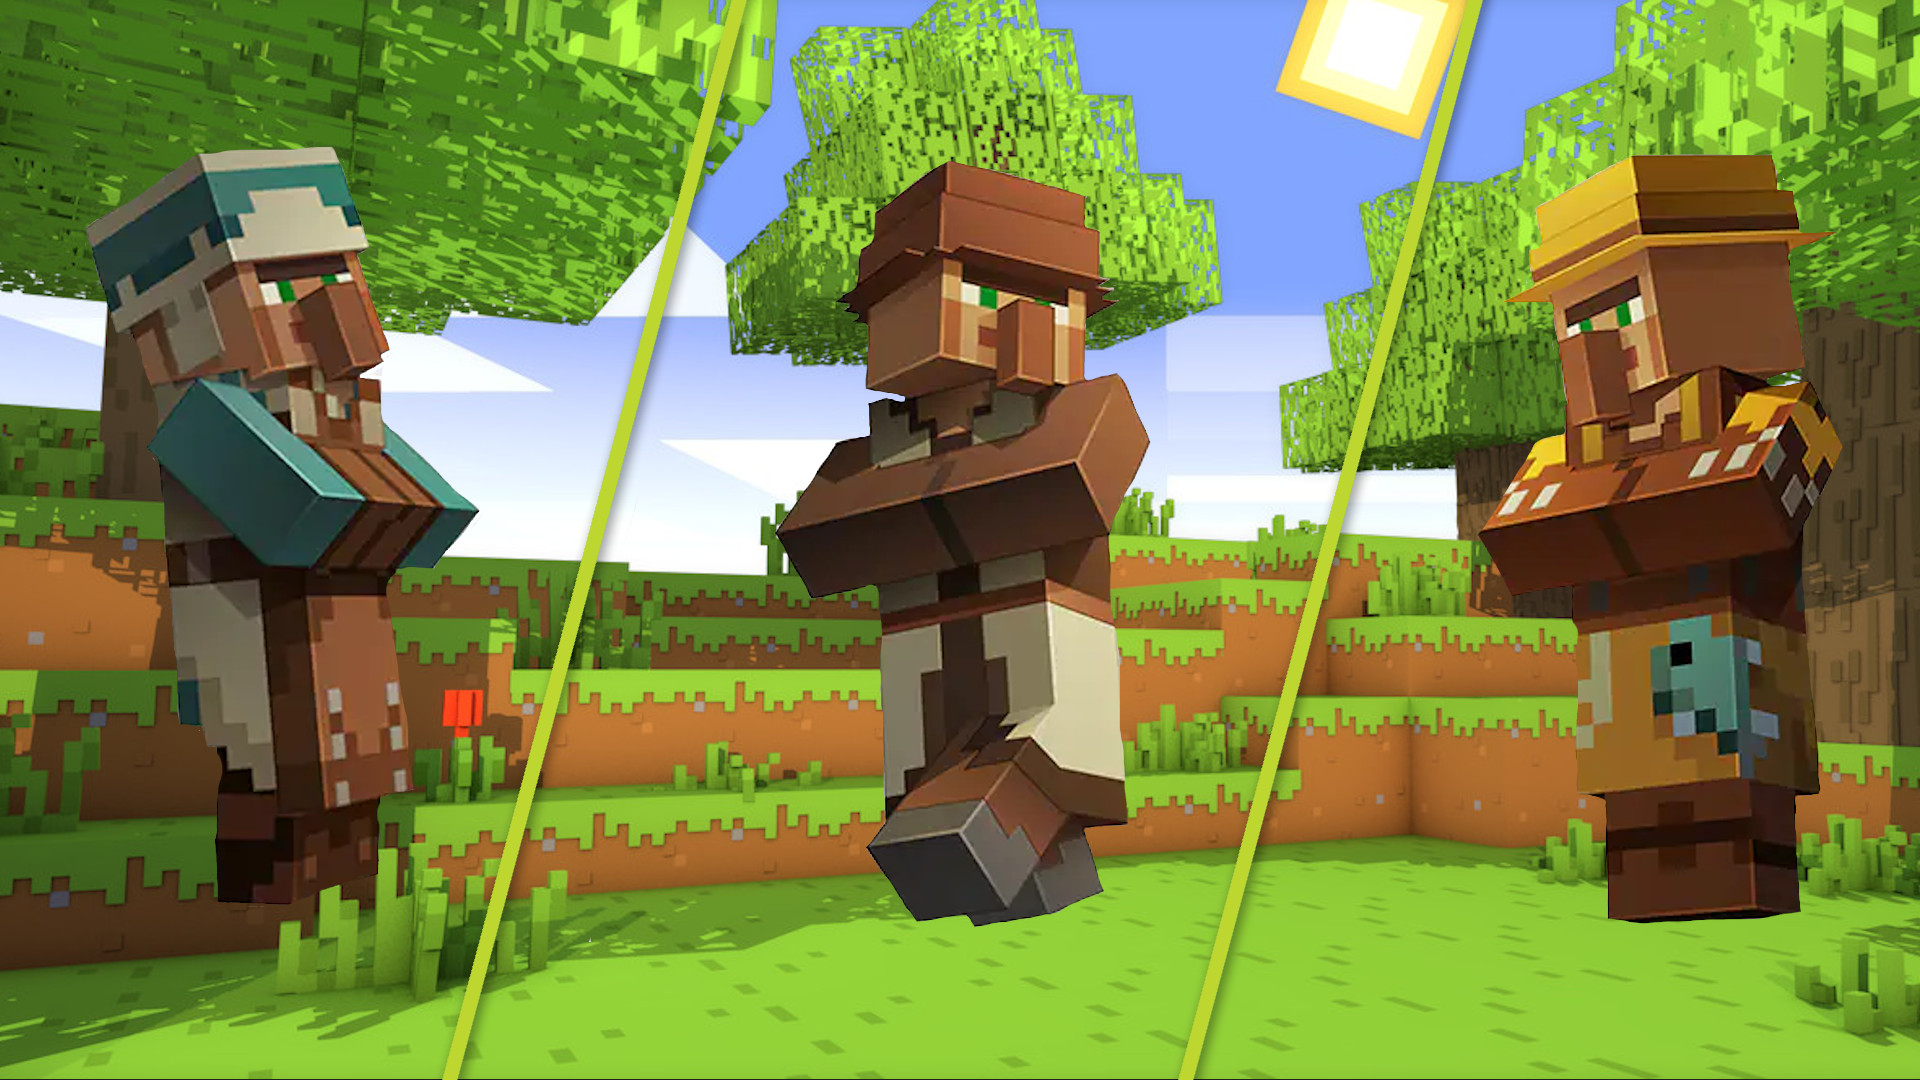 Minecraft Villager Jobs All The Professions Explained The Loadout